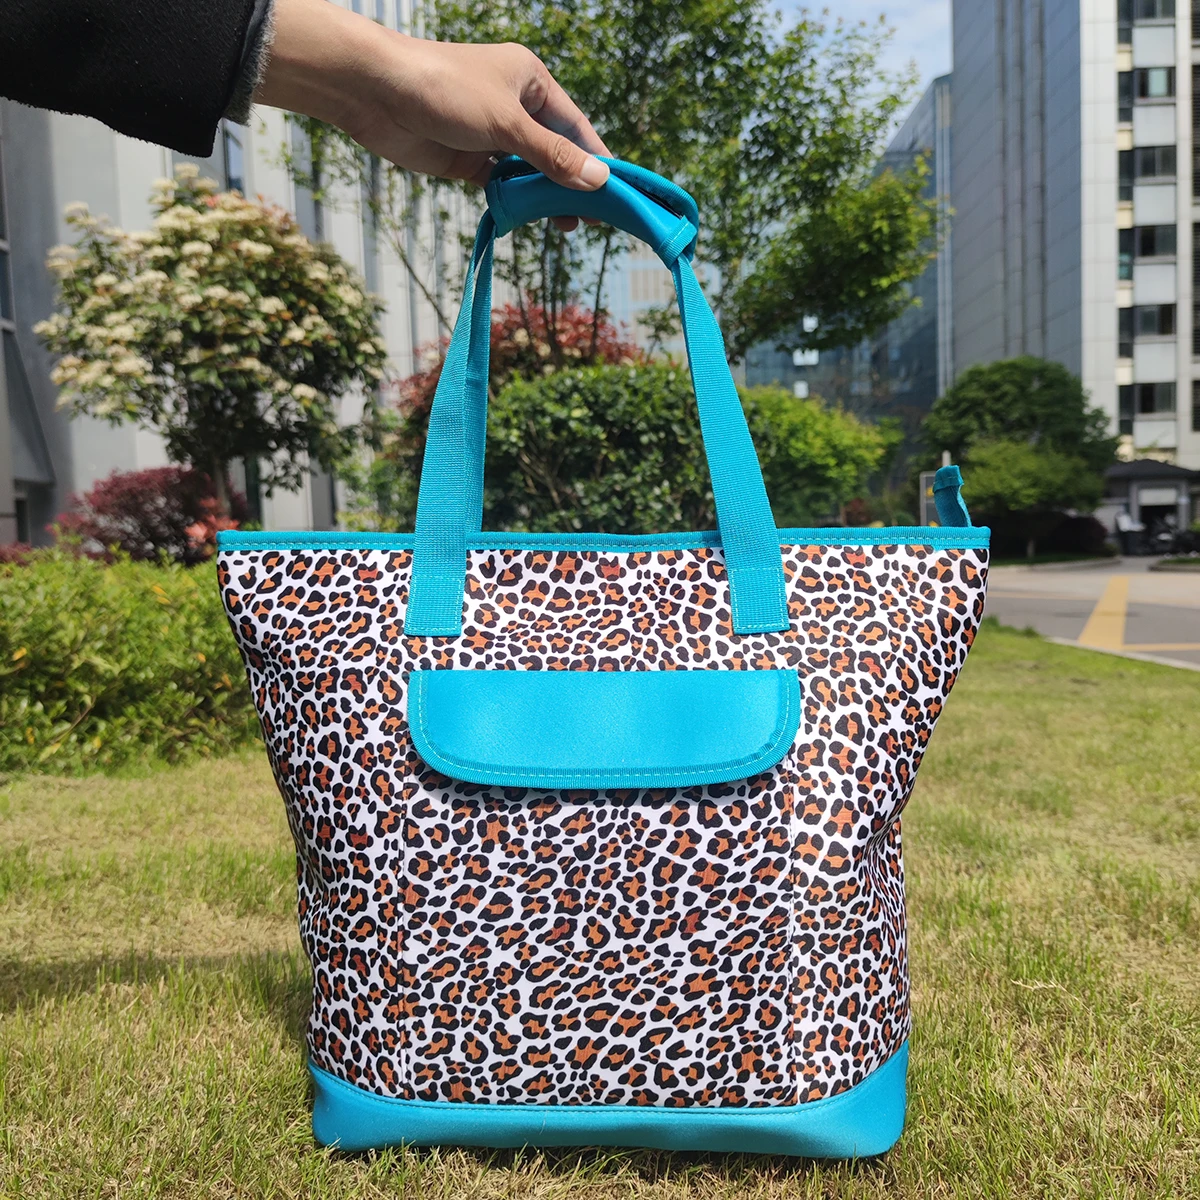 

Free Shipping Leopard Insulated Cooler Tote Bag Premium Quality Soft Sided Women Cooler Grocery Bag Travel Cooler for Food, Serape,leopard,cowhide etc.or as request.